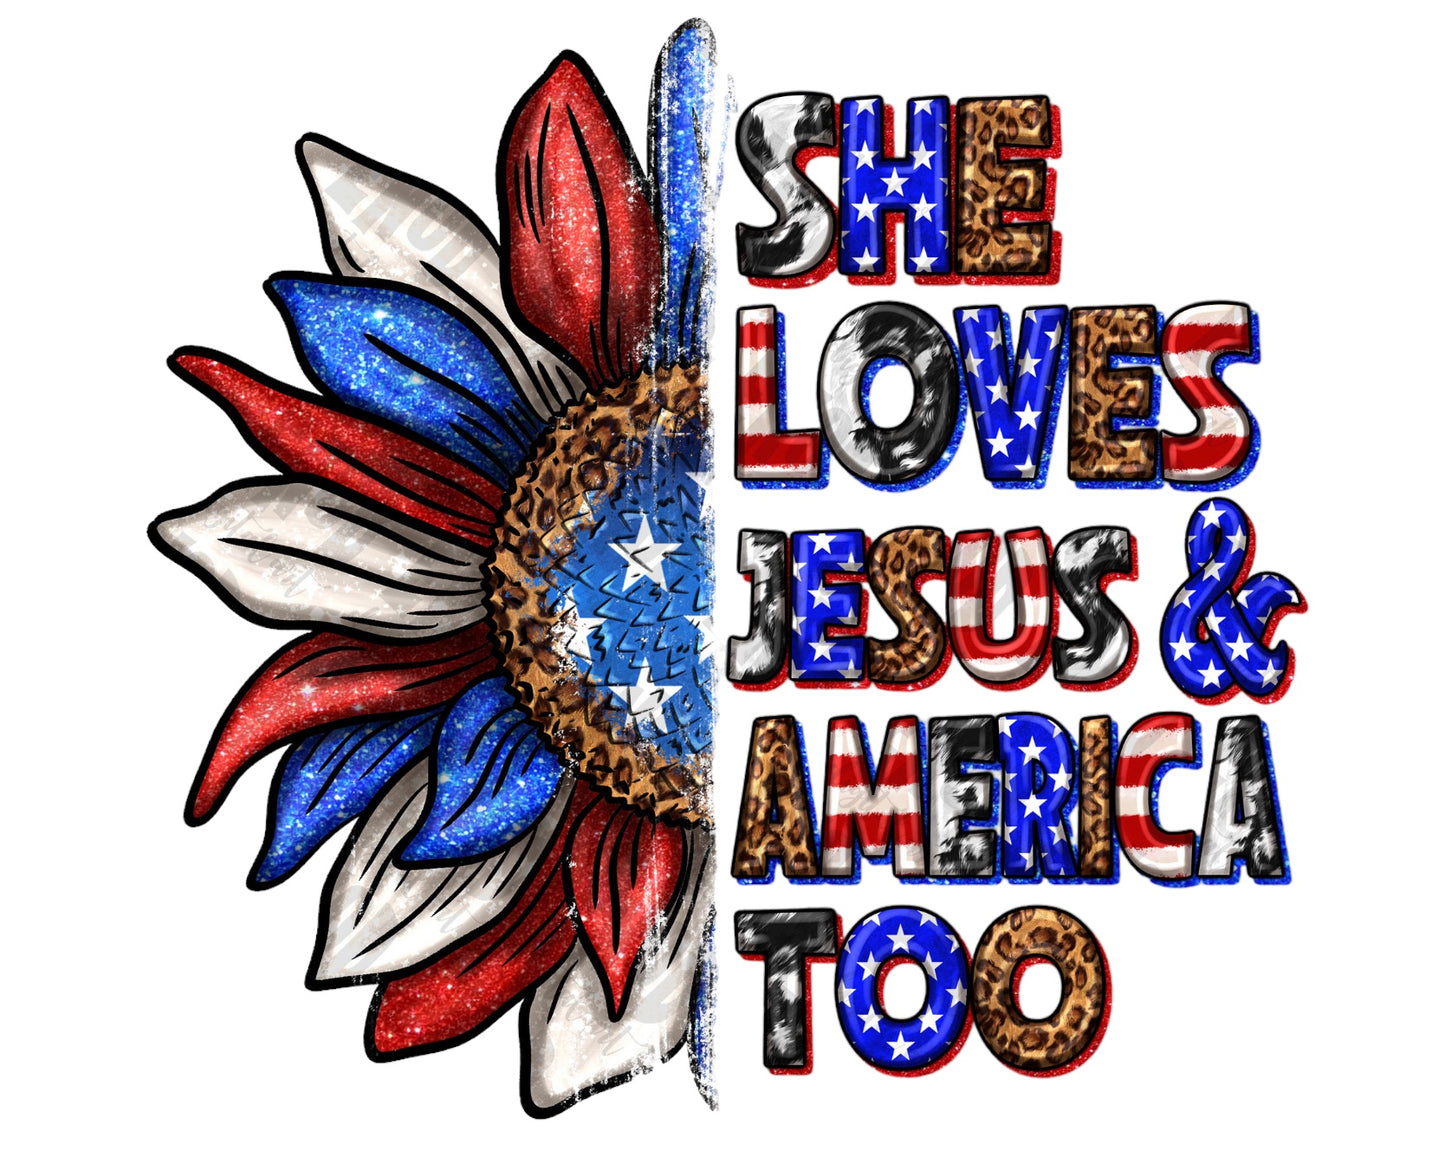 She loves Jesus and America too